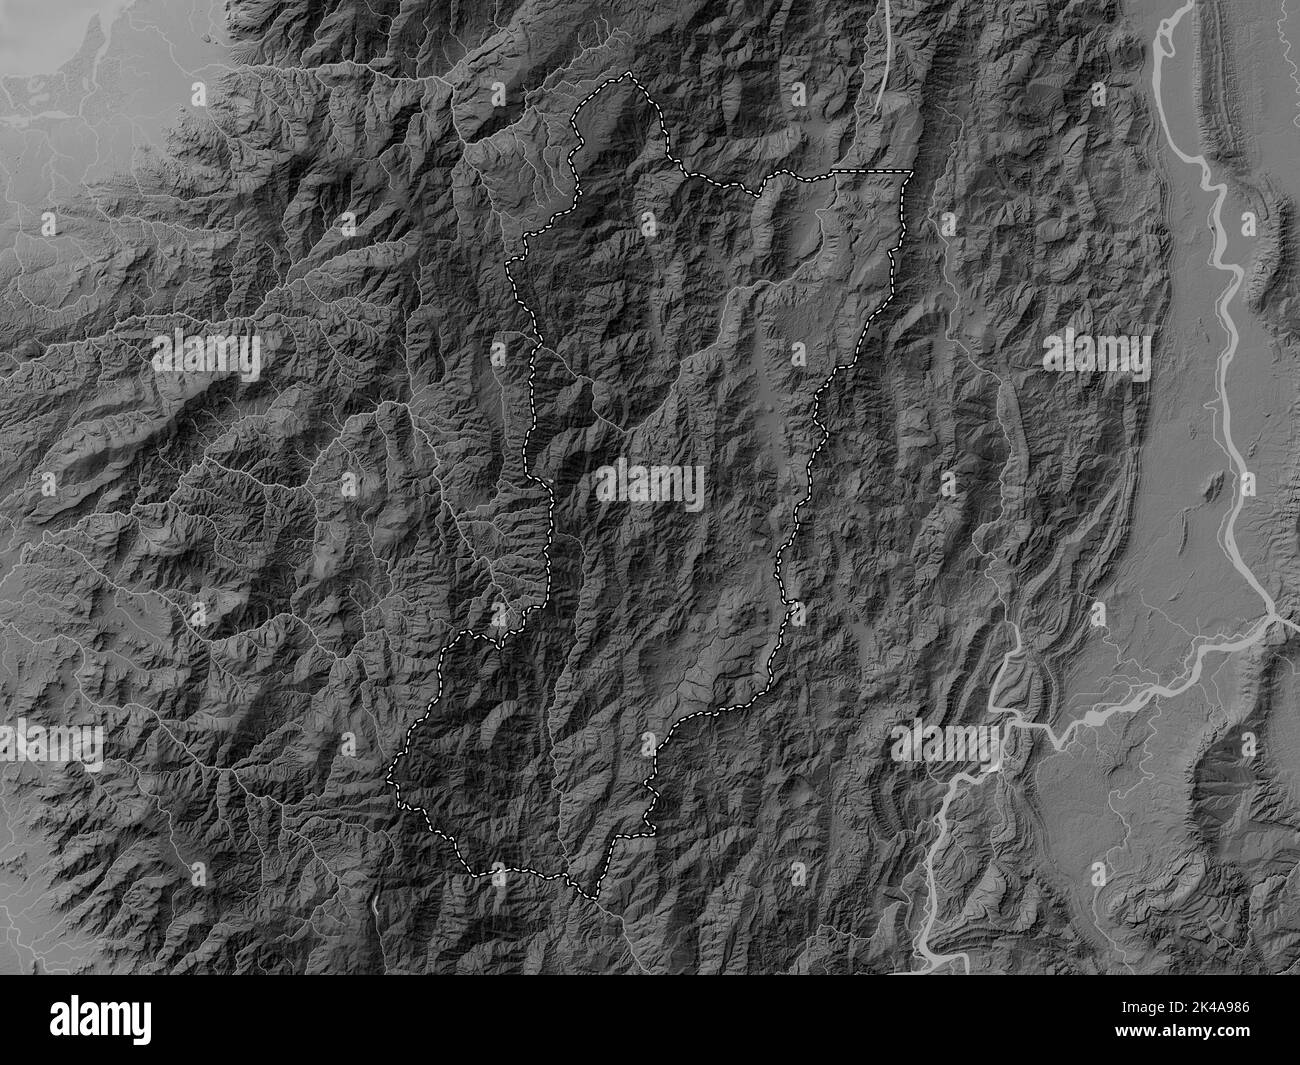 Zamora Chinchipe, province of Ecuador. Grayscale elevation map with lakes and rivers Stock Photo